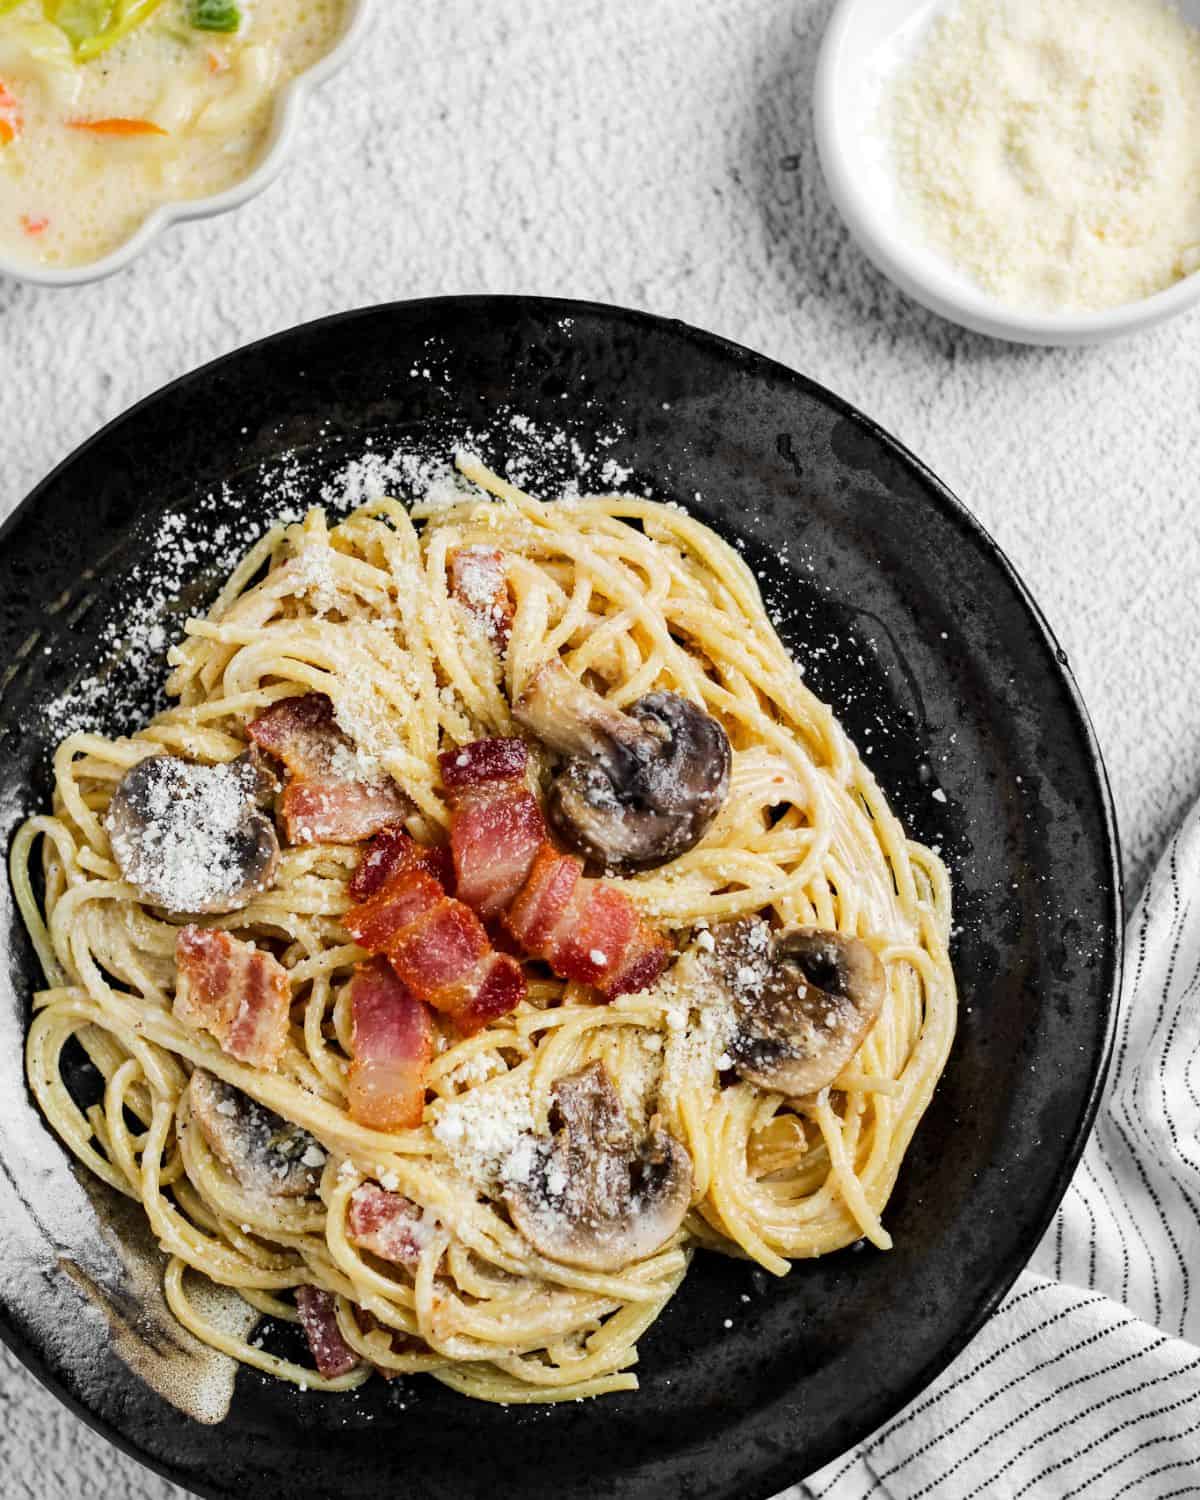 Finish dish of carbonara on a black plate in a table.